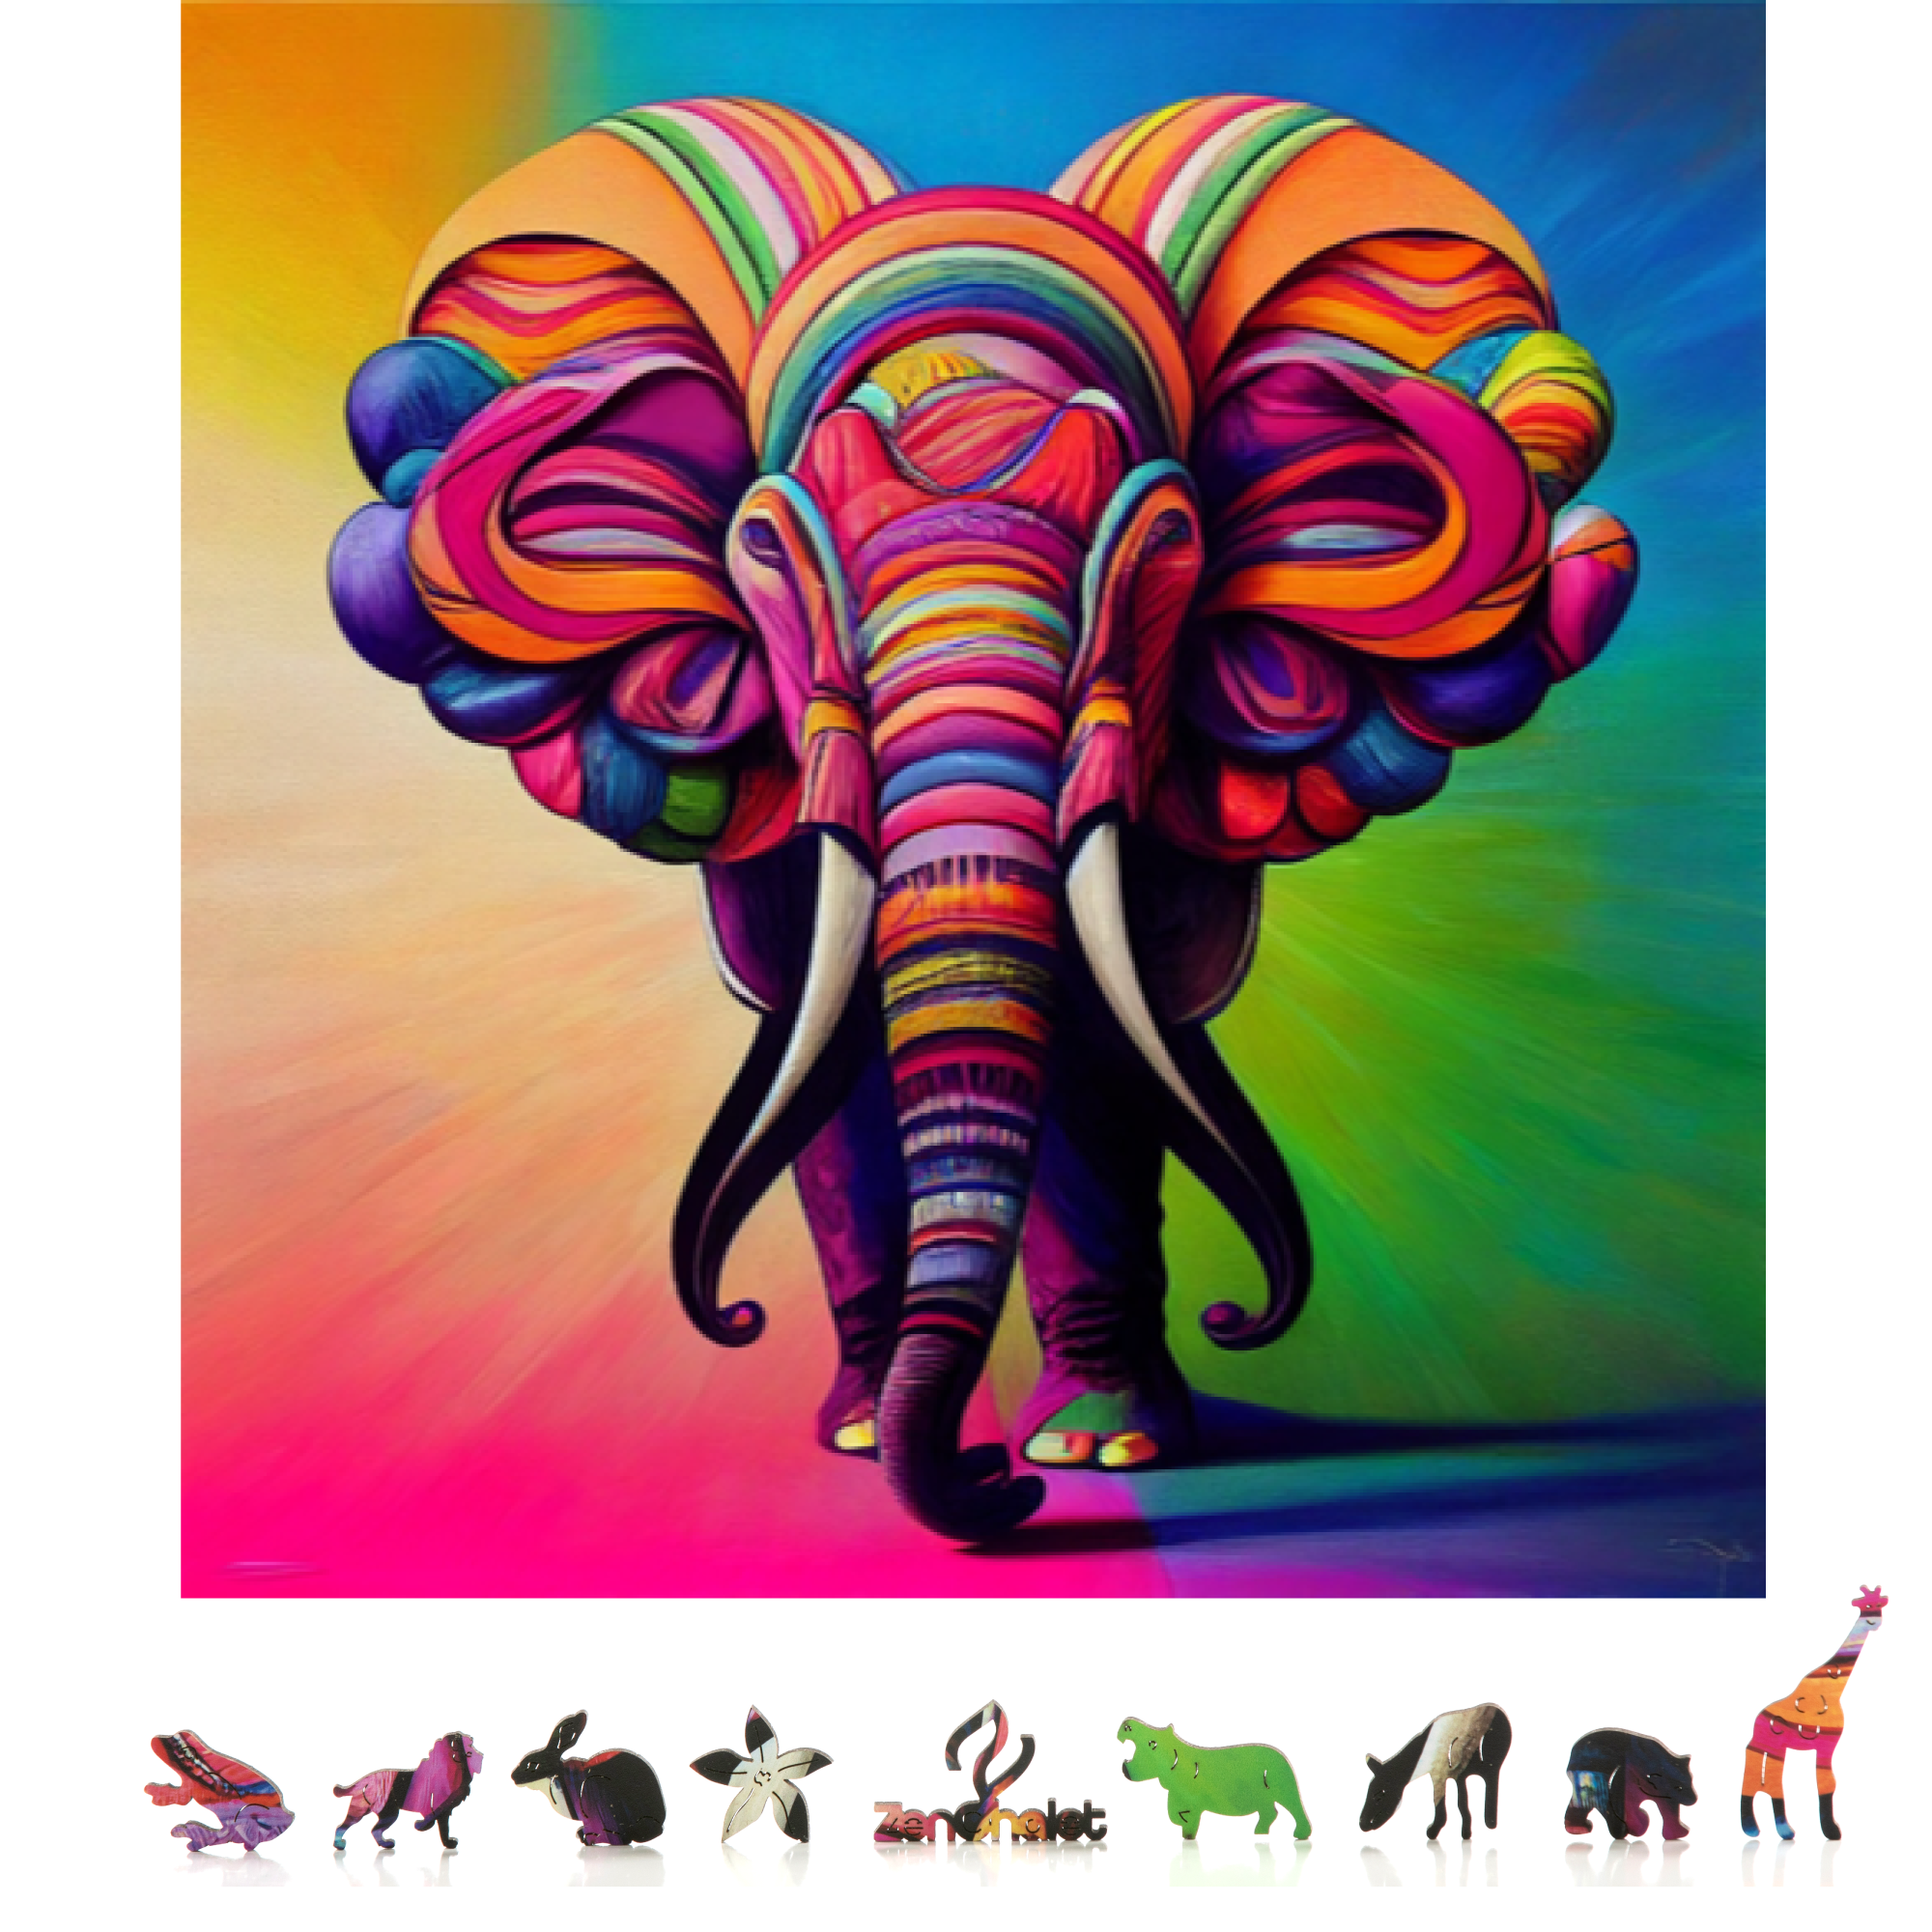  AIXIWAWA Colorful Painting Elephant 500 Piece Puzzle for  Adults, Wooden Jigsaw Puzzles for Fun Family Activity 20.5 x 14.9 inch :  Toys & Games